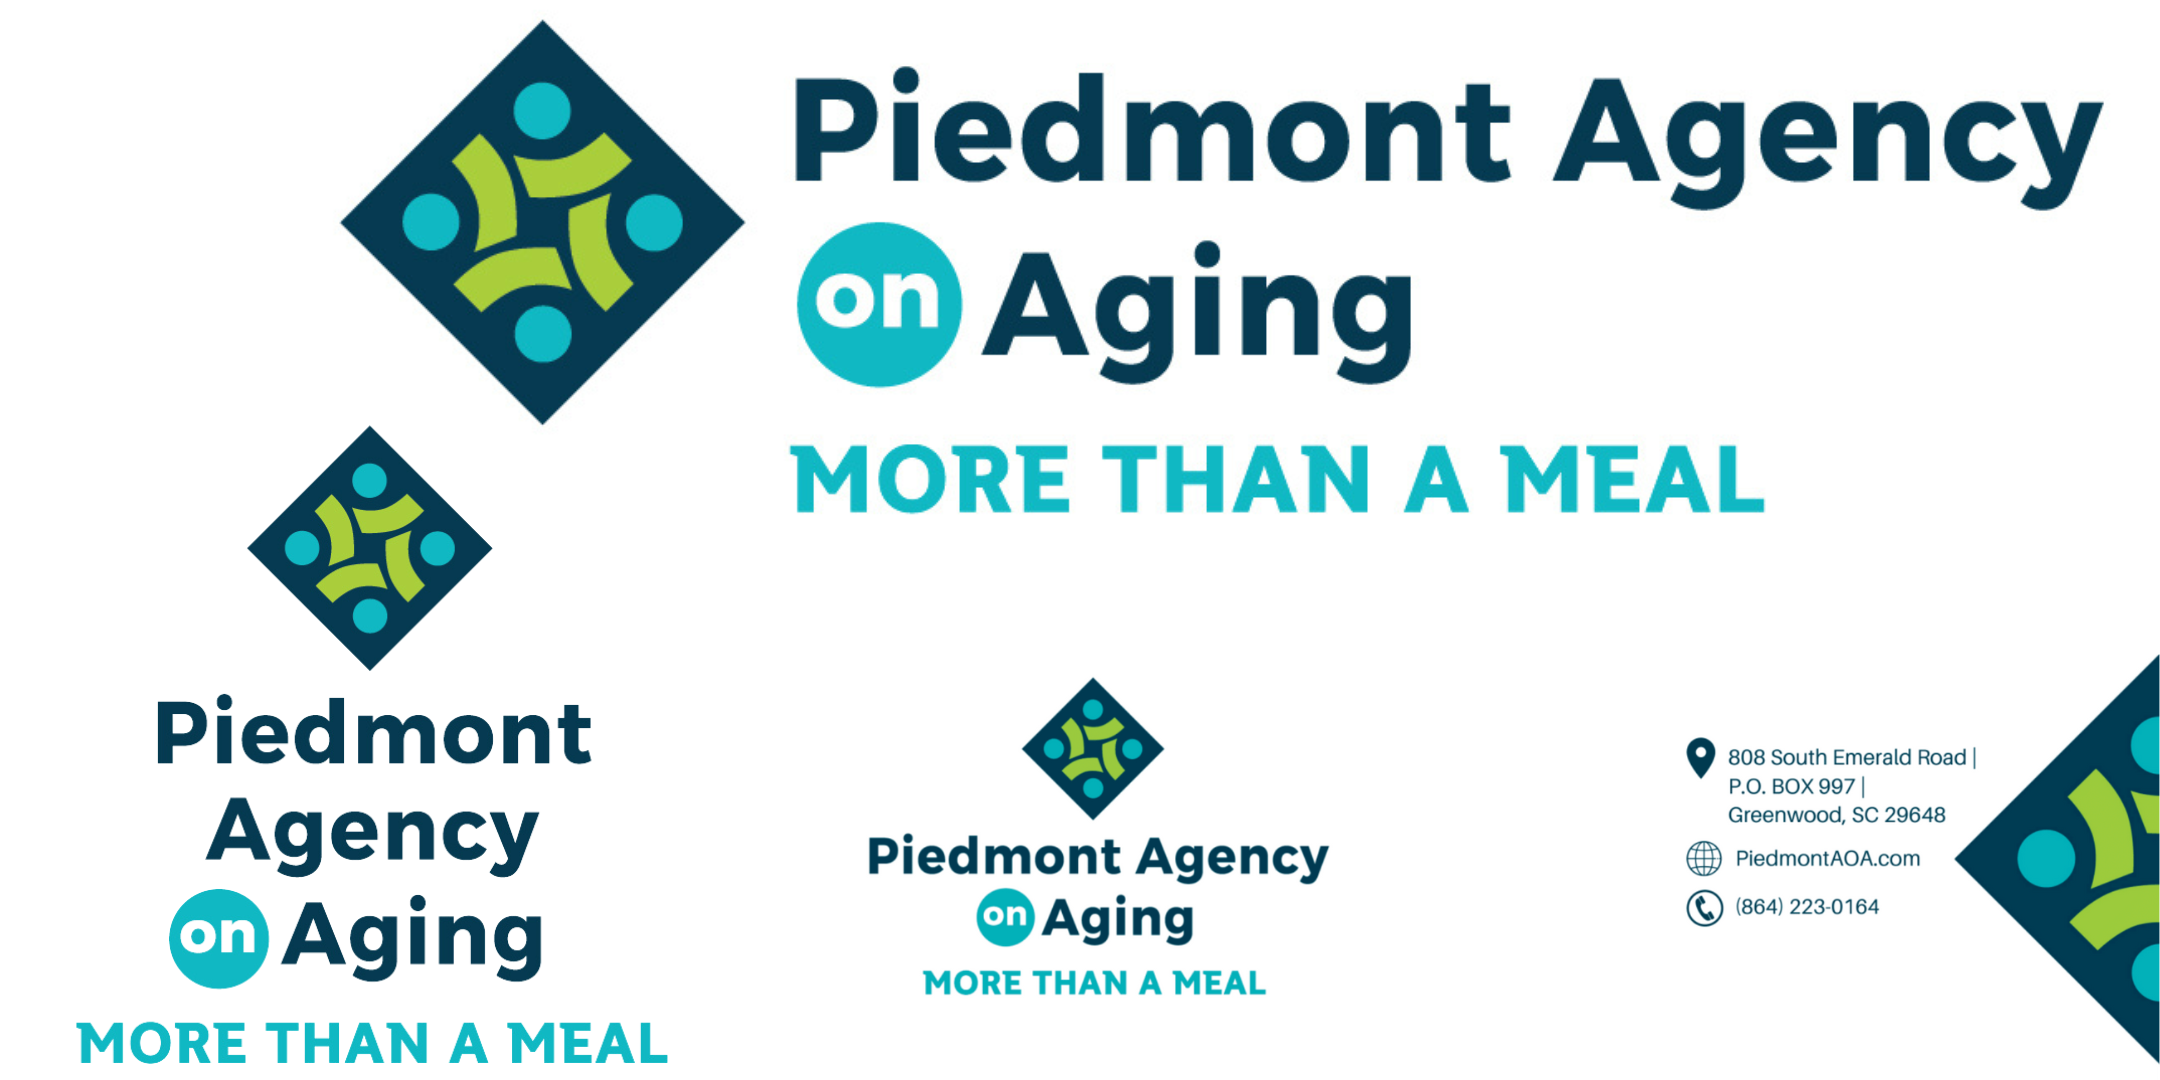 Piedmont Agency on Aging